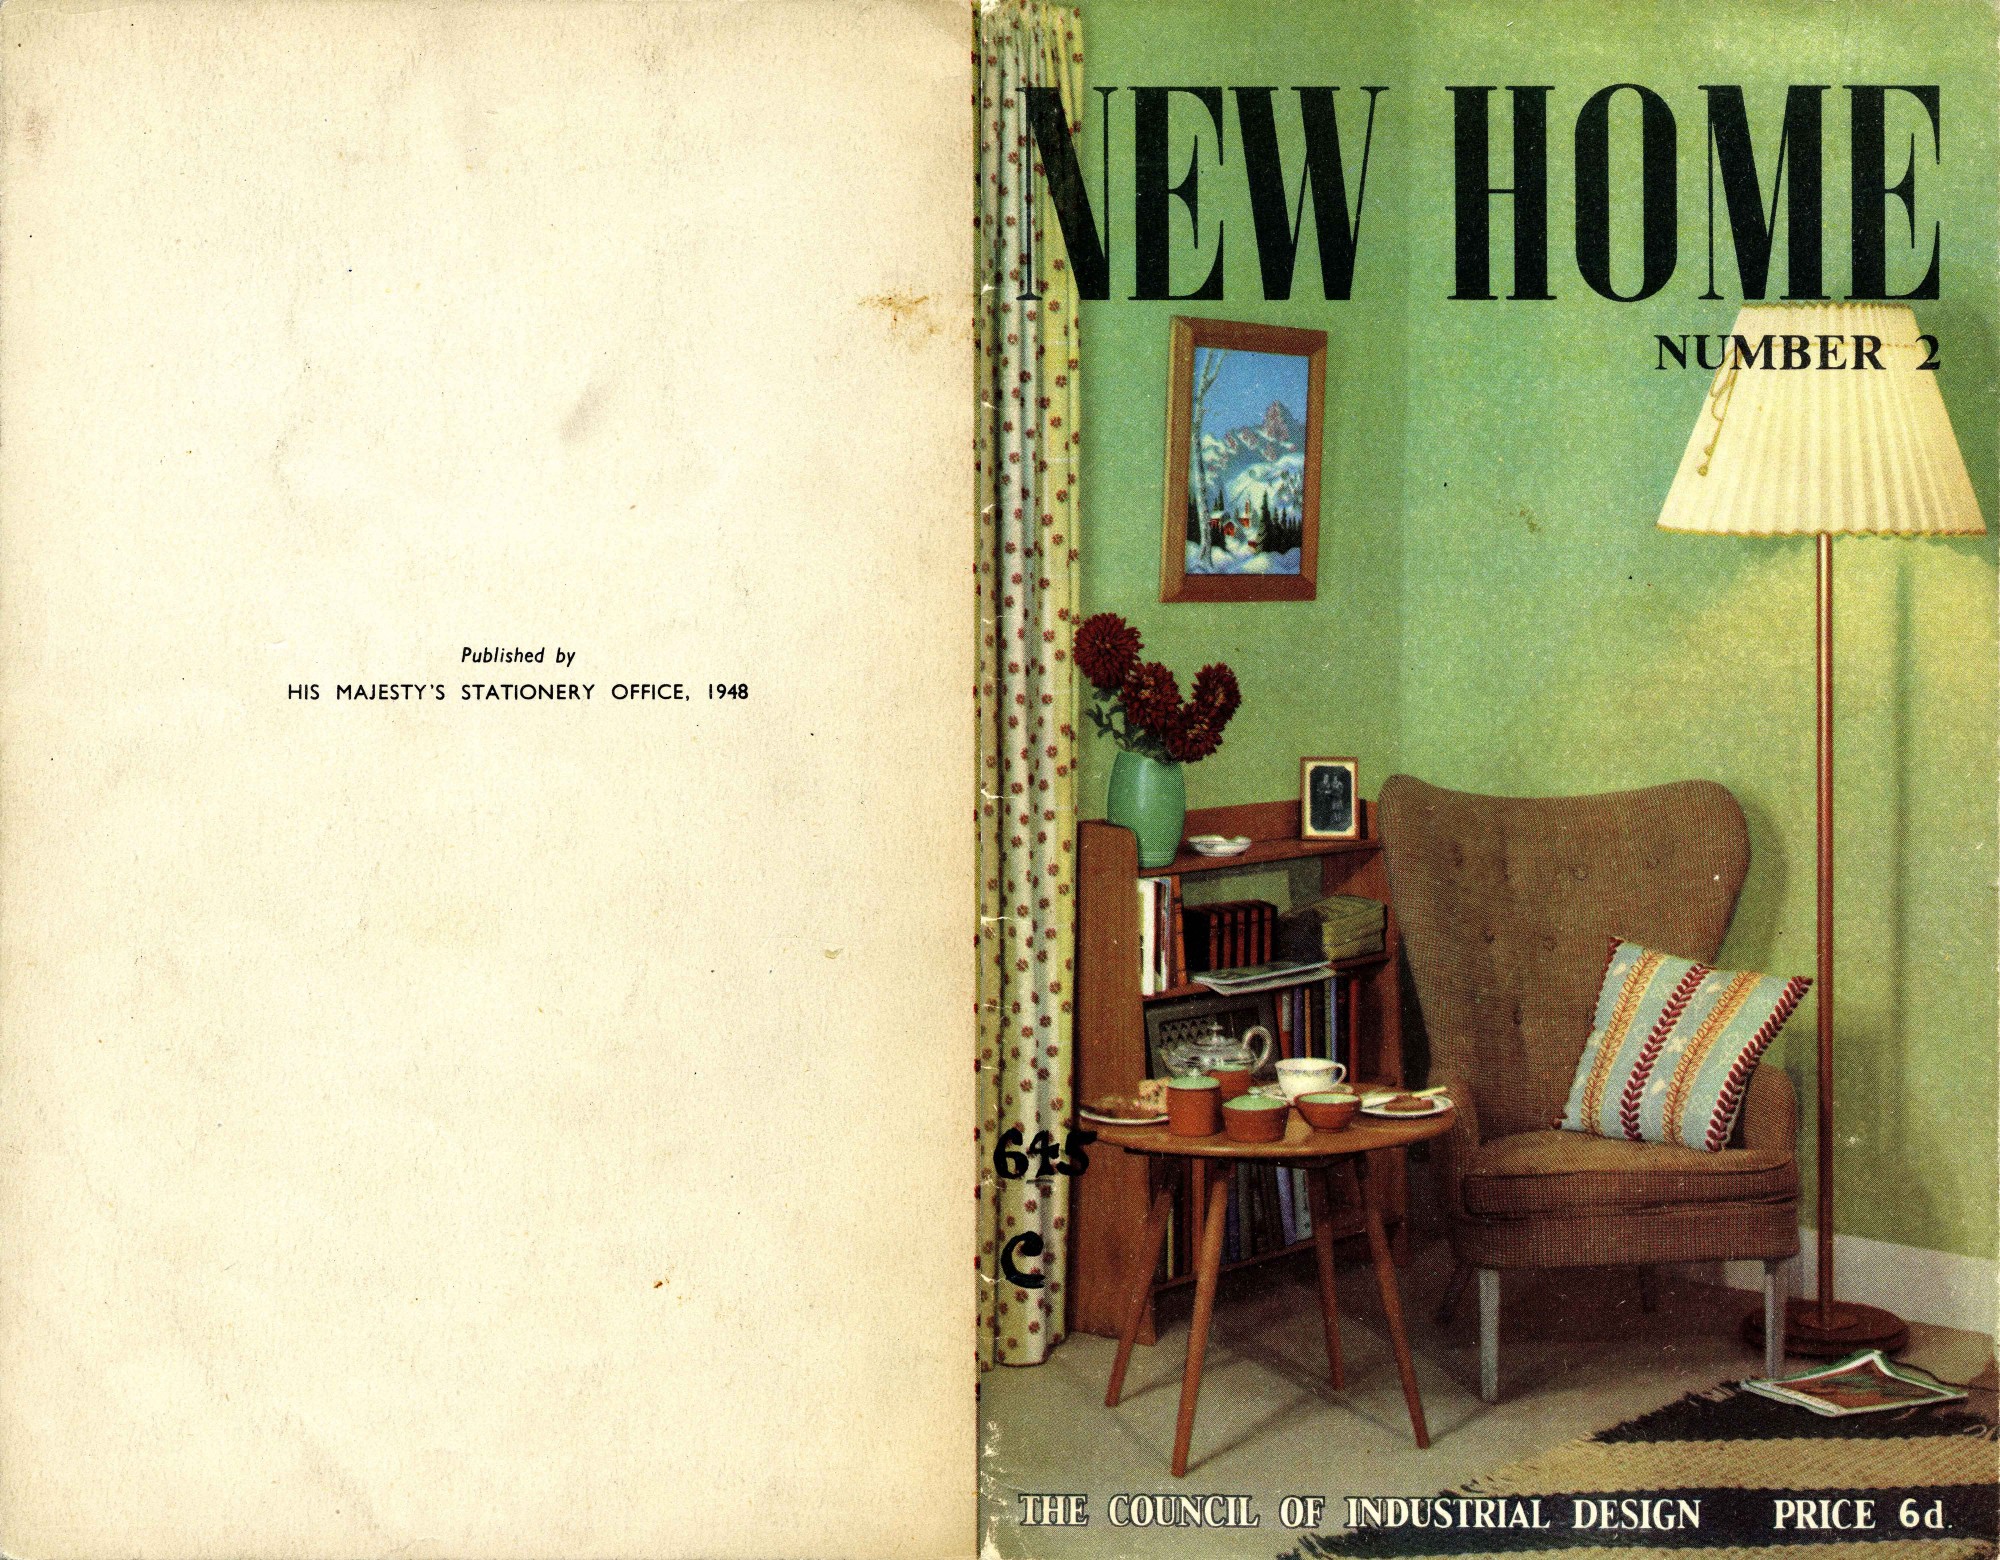 Image showing the front and back cover of New Home magazine number 2, showing a colour image of an armchair with a tea set, book shelf and floor lamp